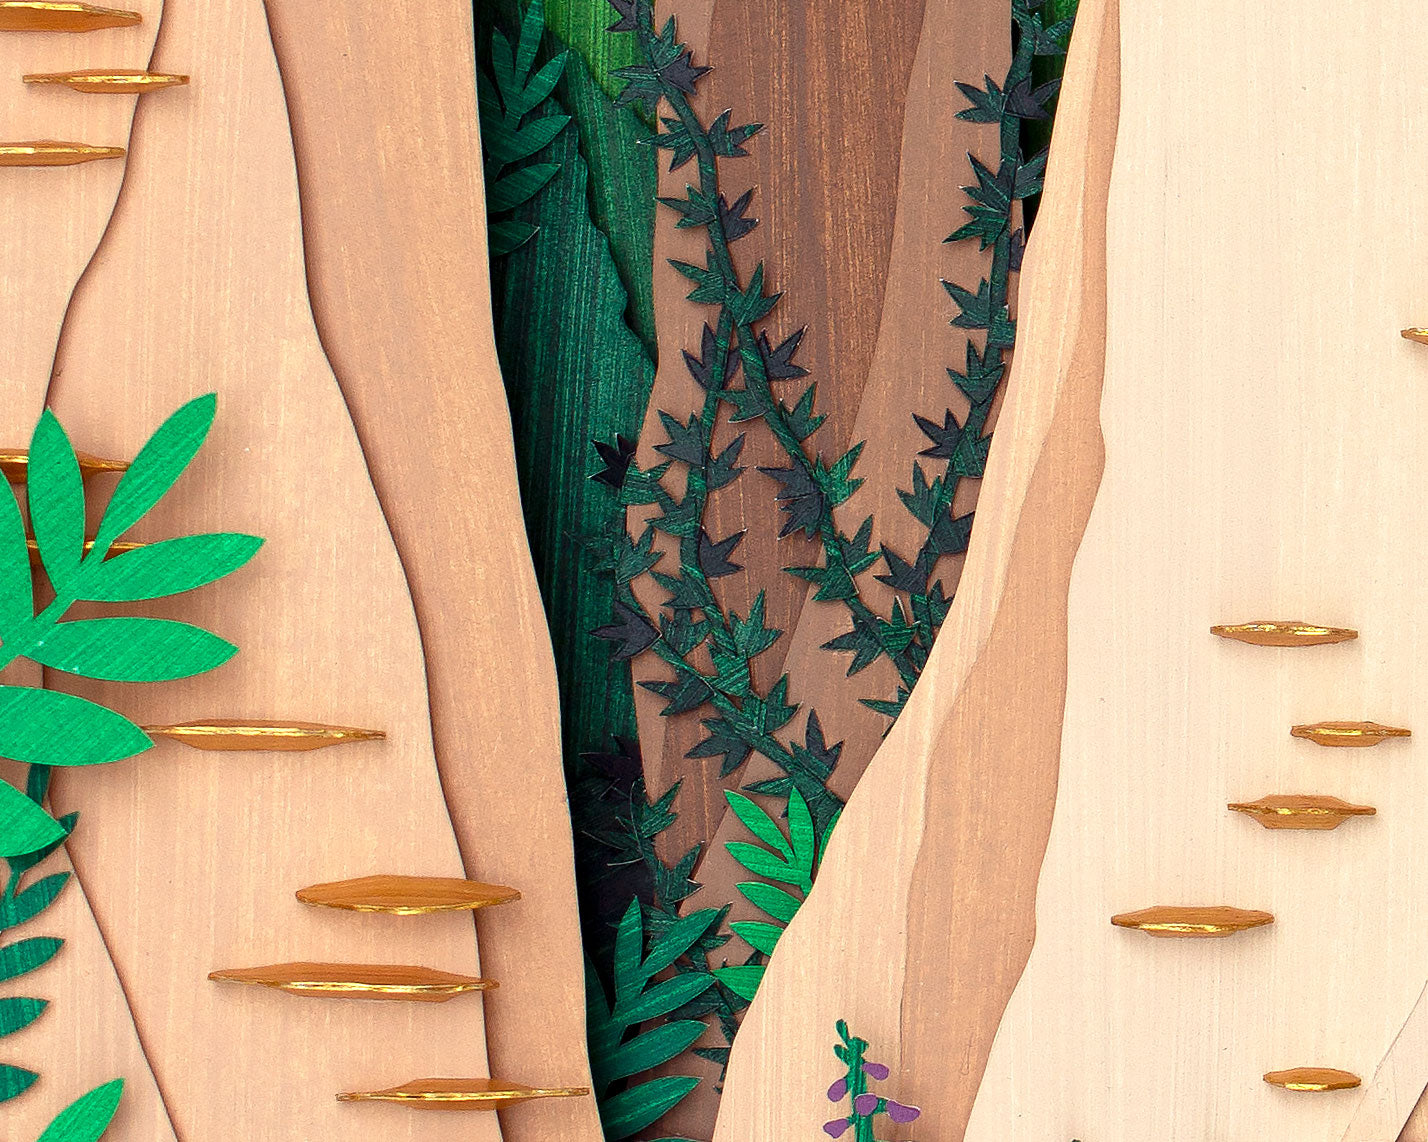 Archival print of cut paper illustration of cute whimsical forrest scene, showing details of foliage and tree trunks.